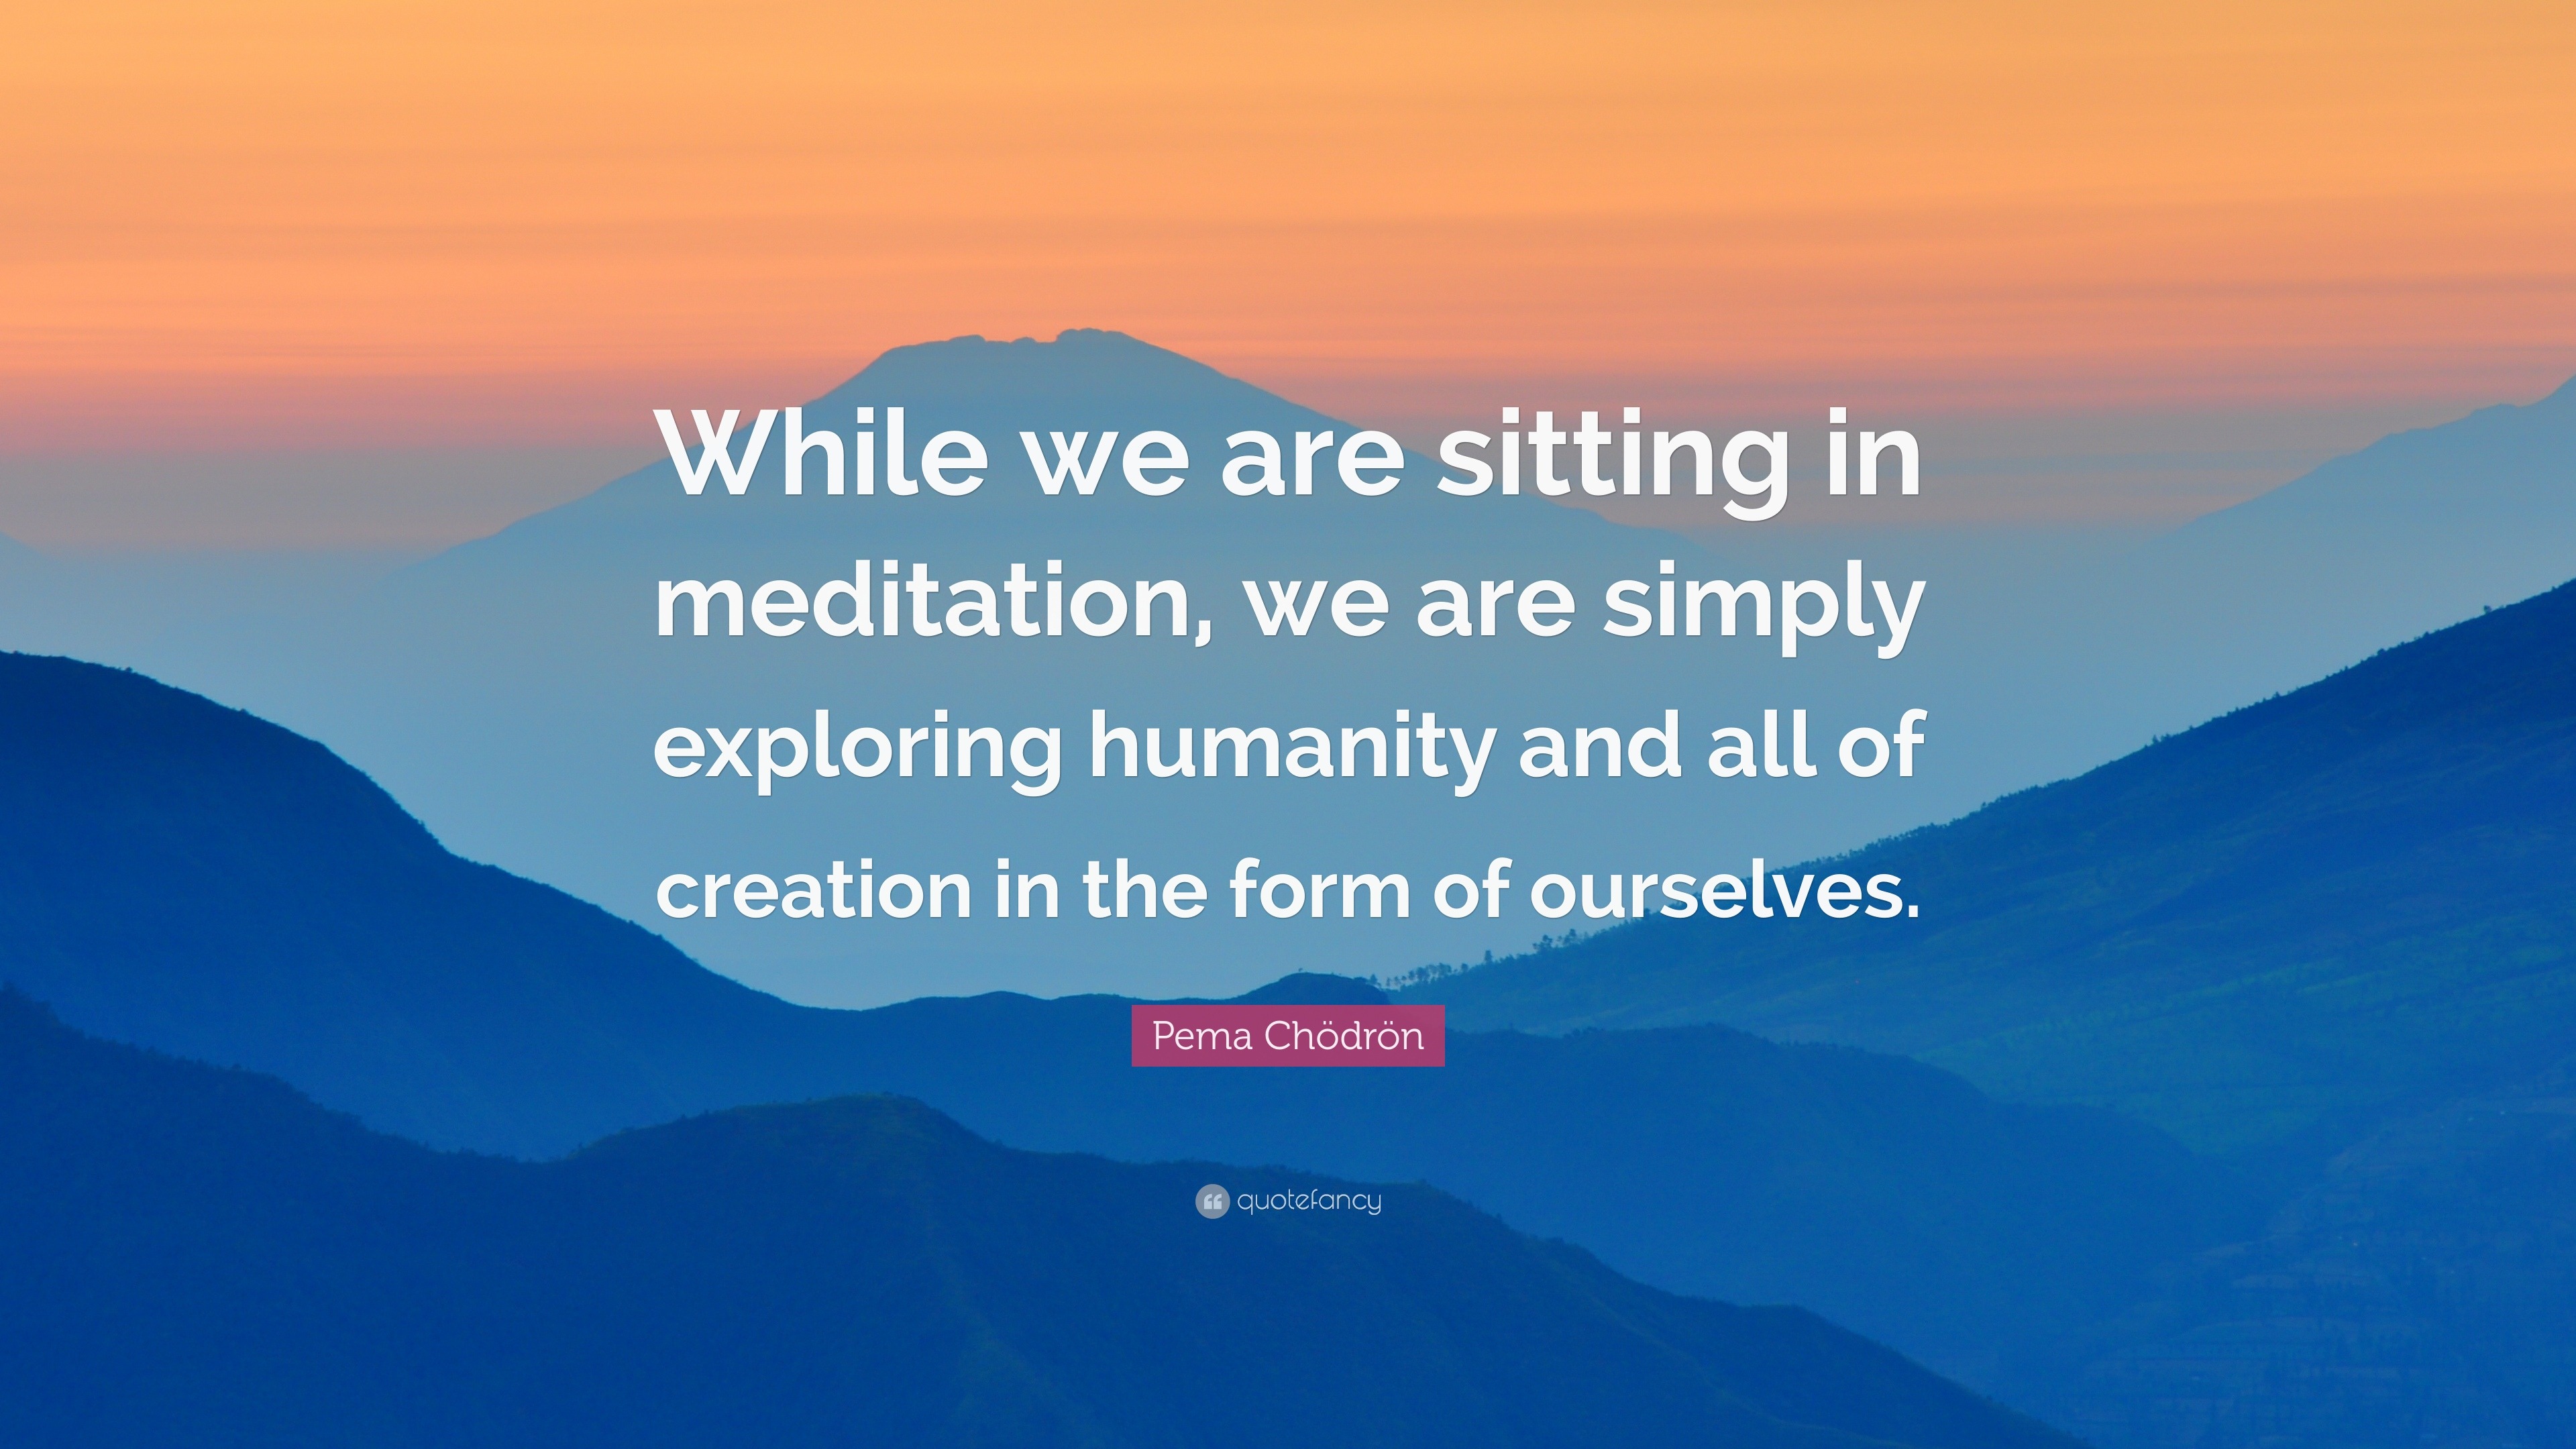 Pema Chödrön Quote: “While we are sitting in meditation, we are simply ...